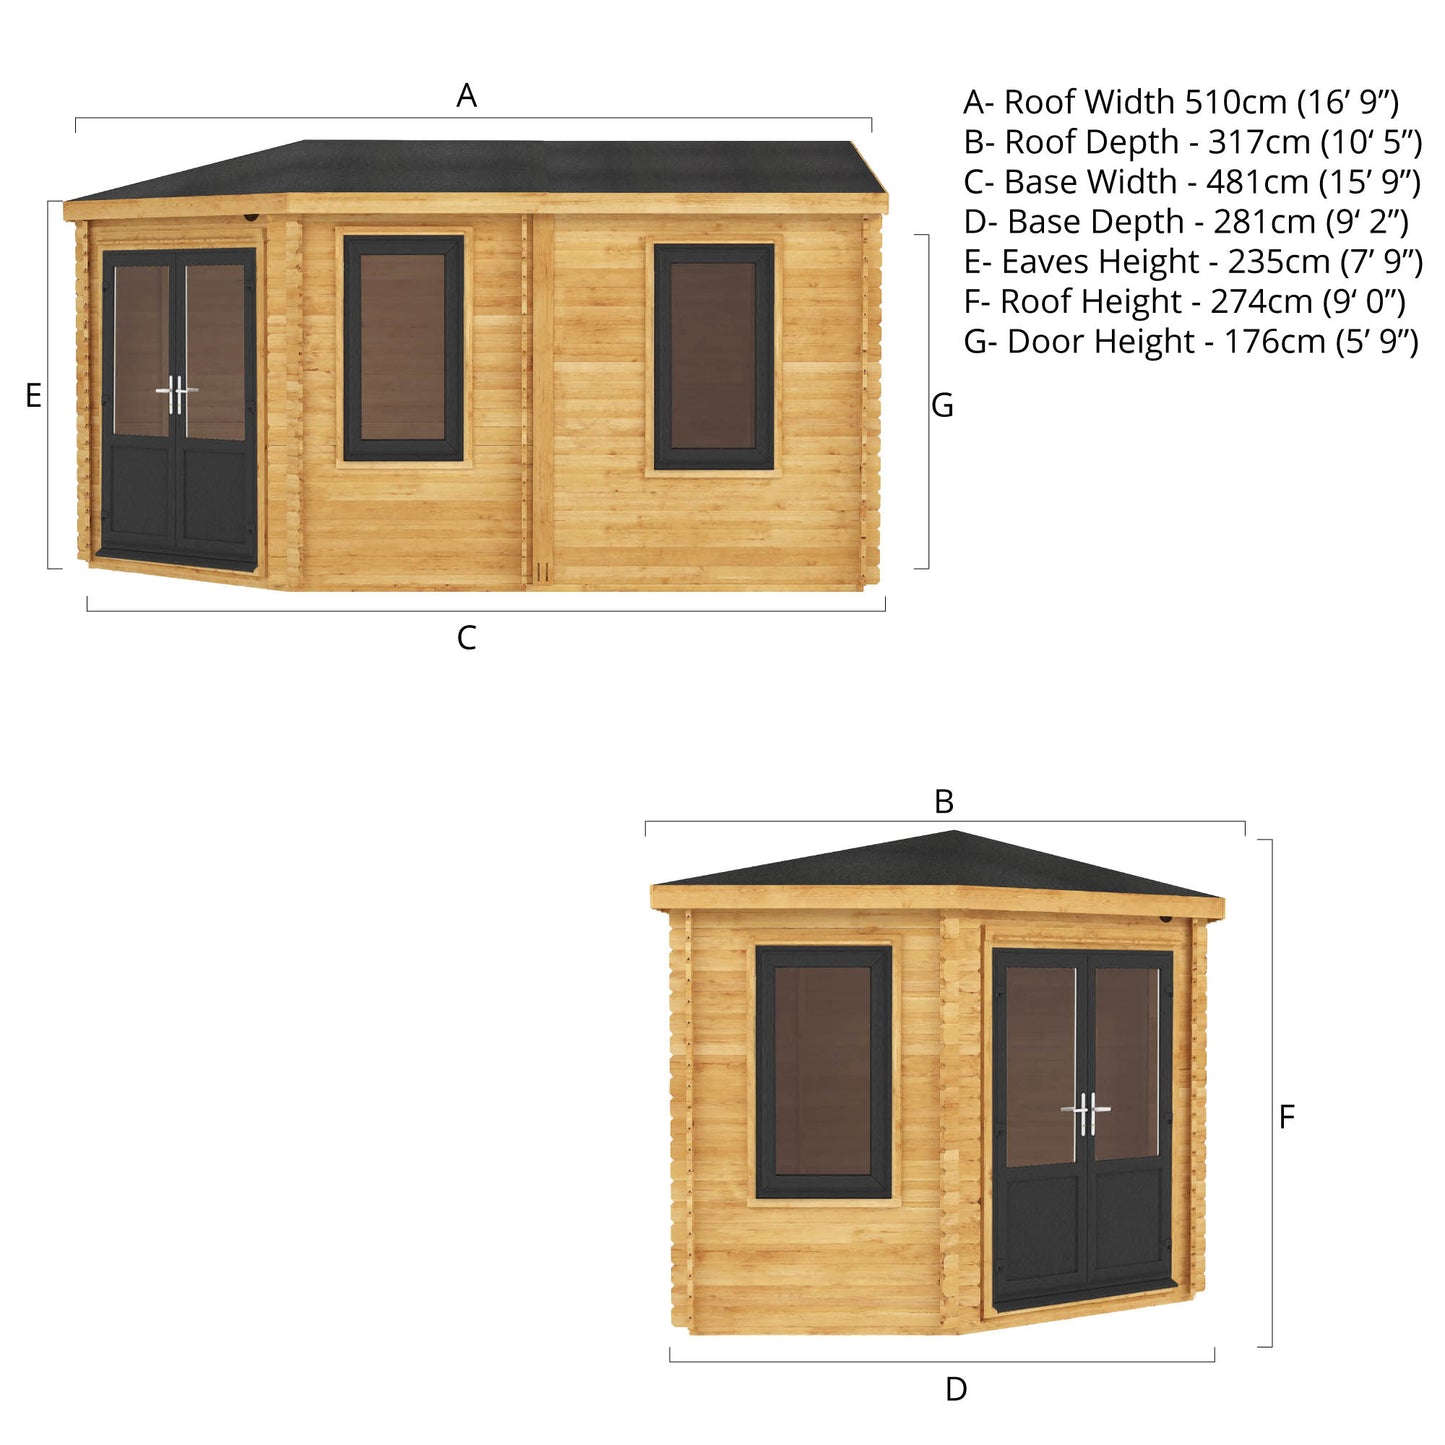 The Goldcrest 5m x 3m Log Cabin with Anthracite UPVC